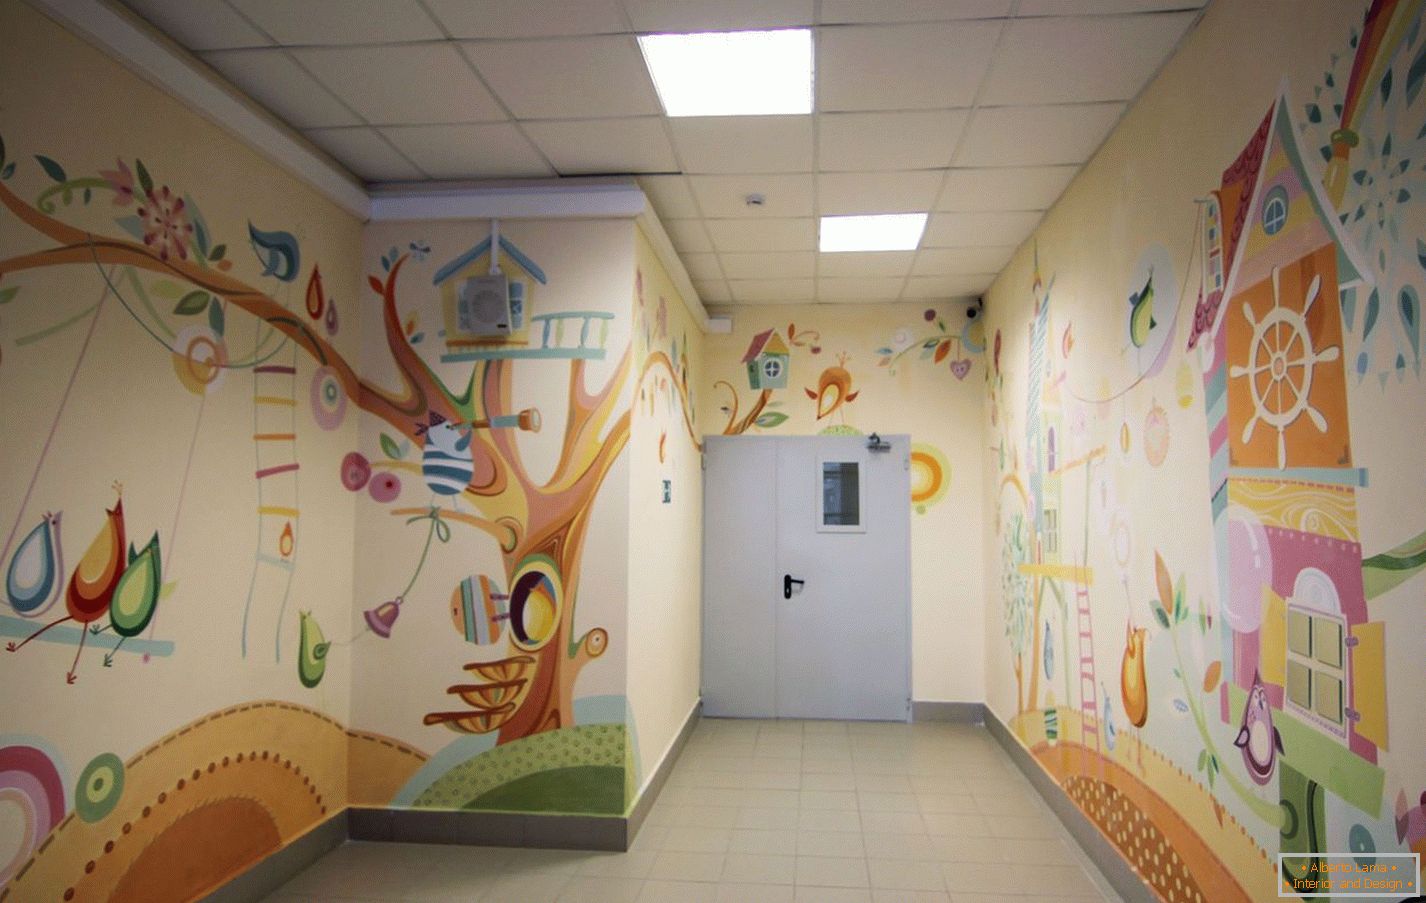 Drawings on the walls in the kindergarten